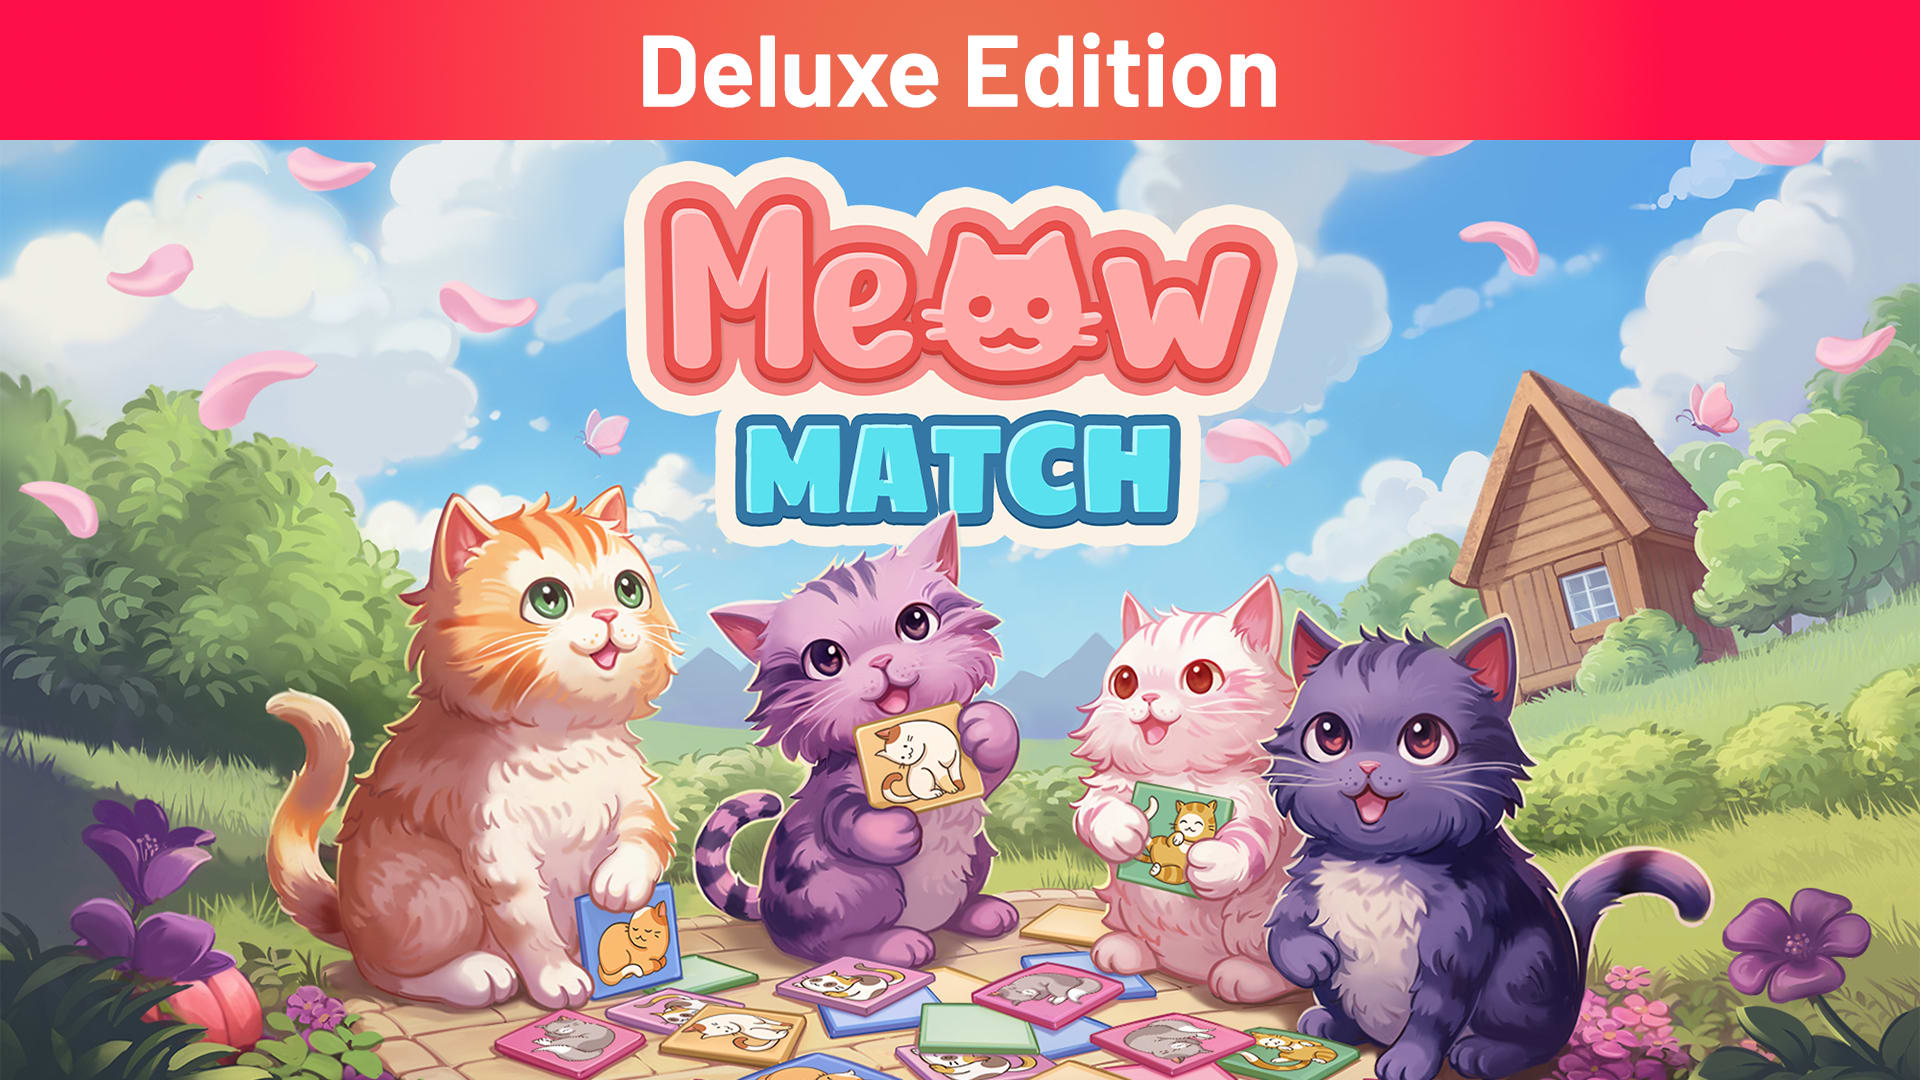 Meowmatch Deluxe Edition